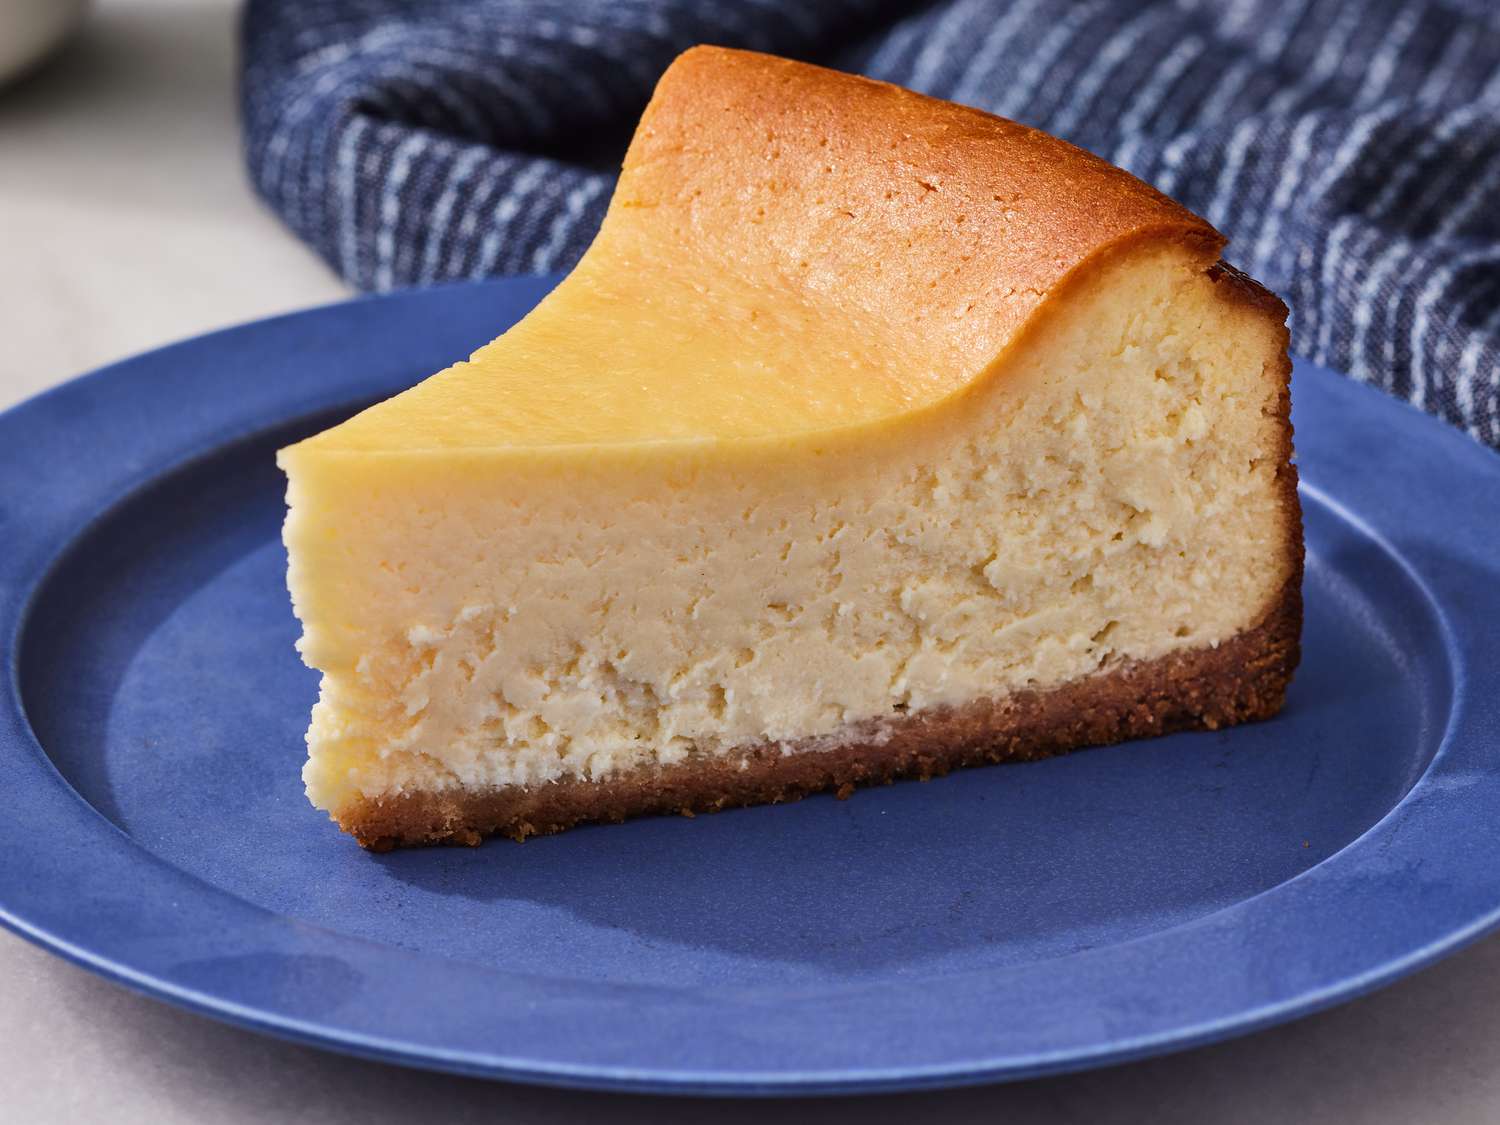 Why is cheesecake so delicious?